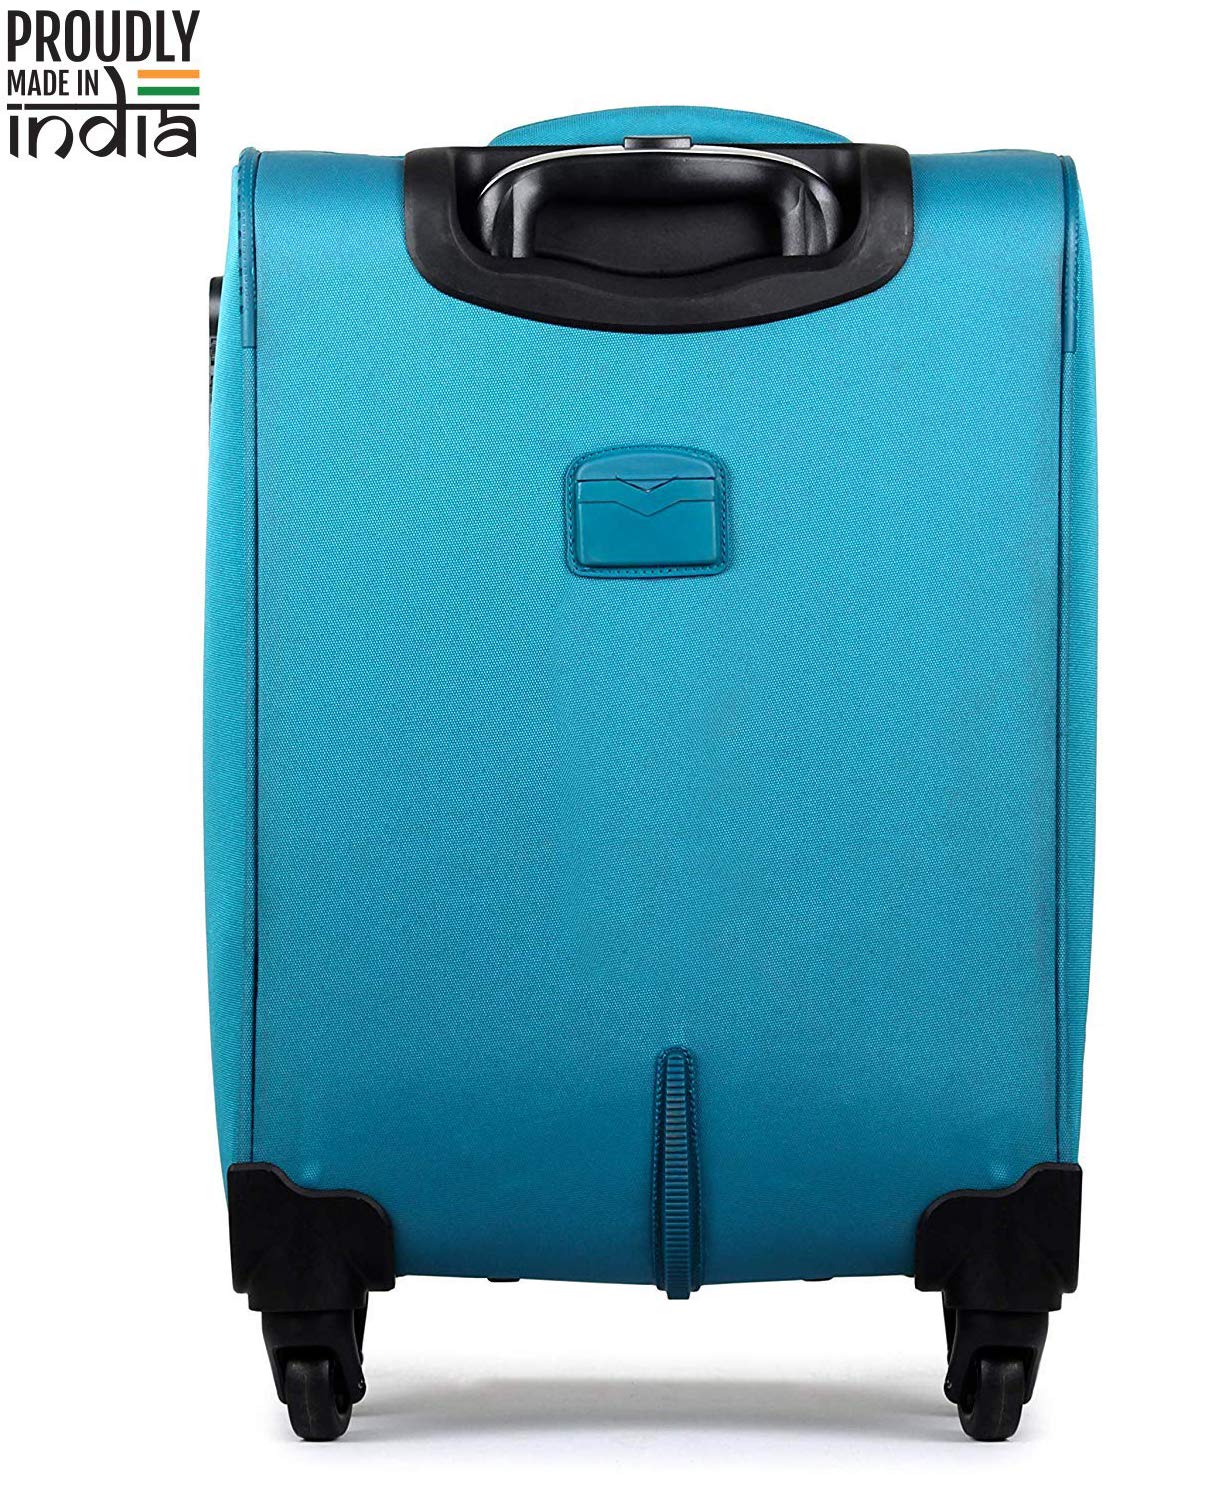 THE CLOWNFISH Globetrotter Series Luggage Polyester Softsided Suitcase 4 Wheel Trolley Bag (61 cm, Crimson Red)